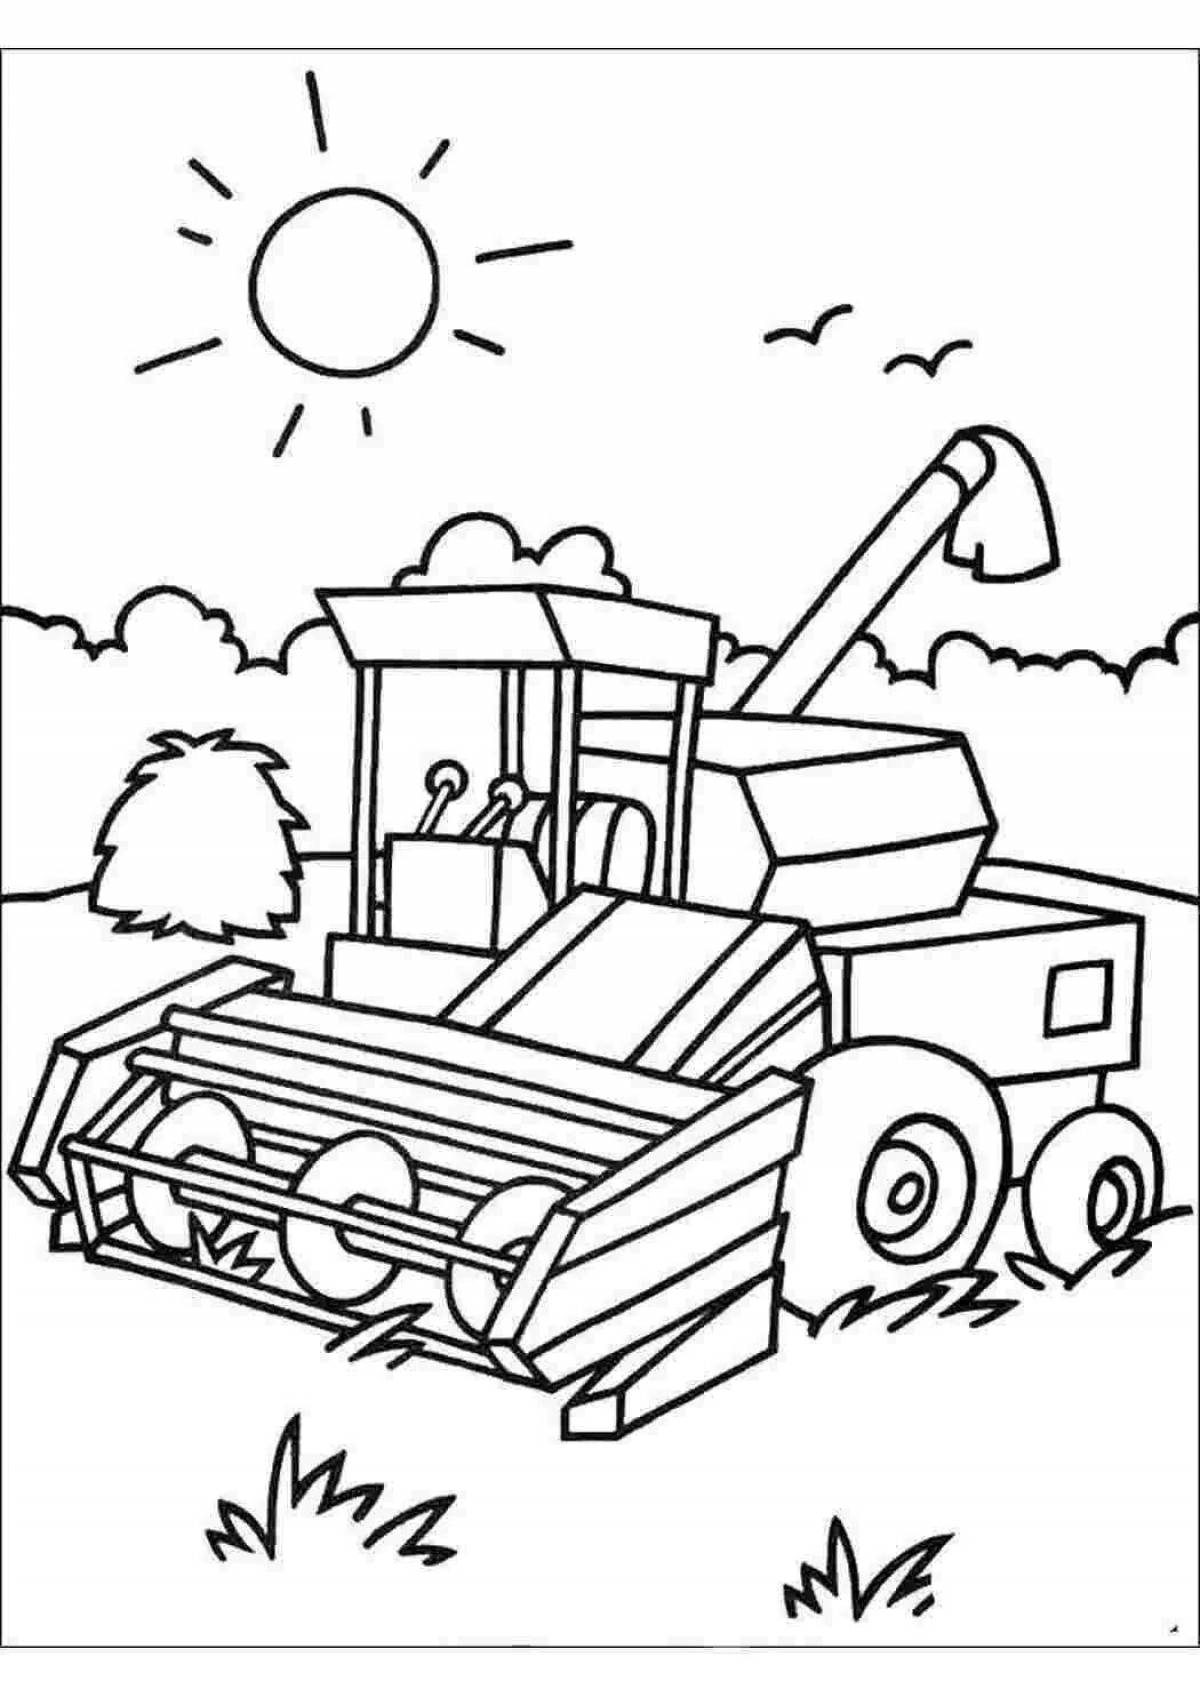 Exciting combine coloring for teens